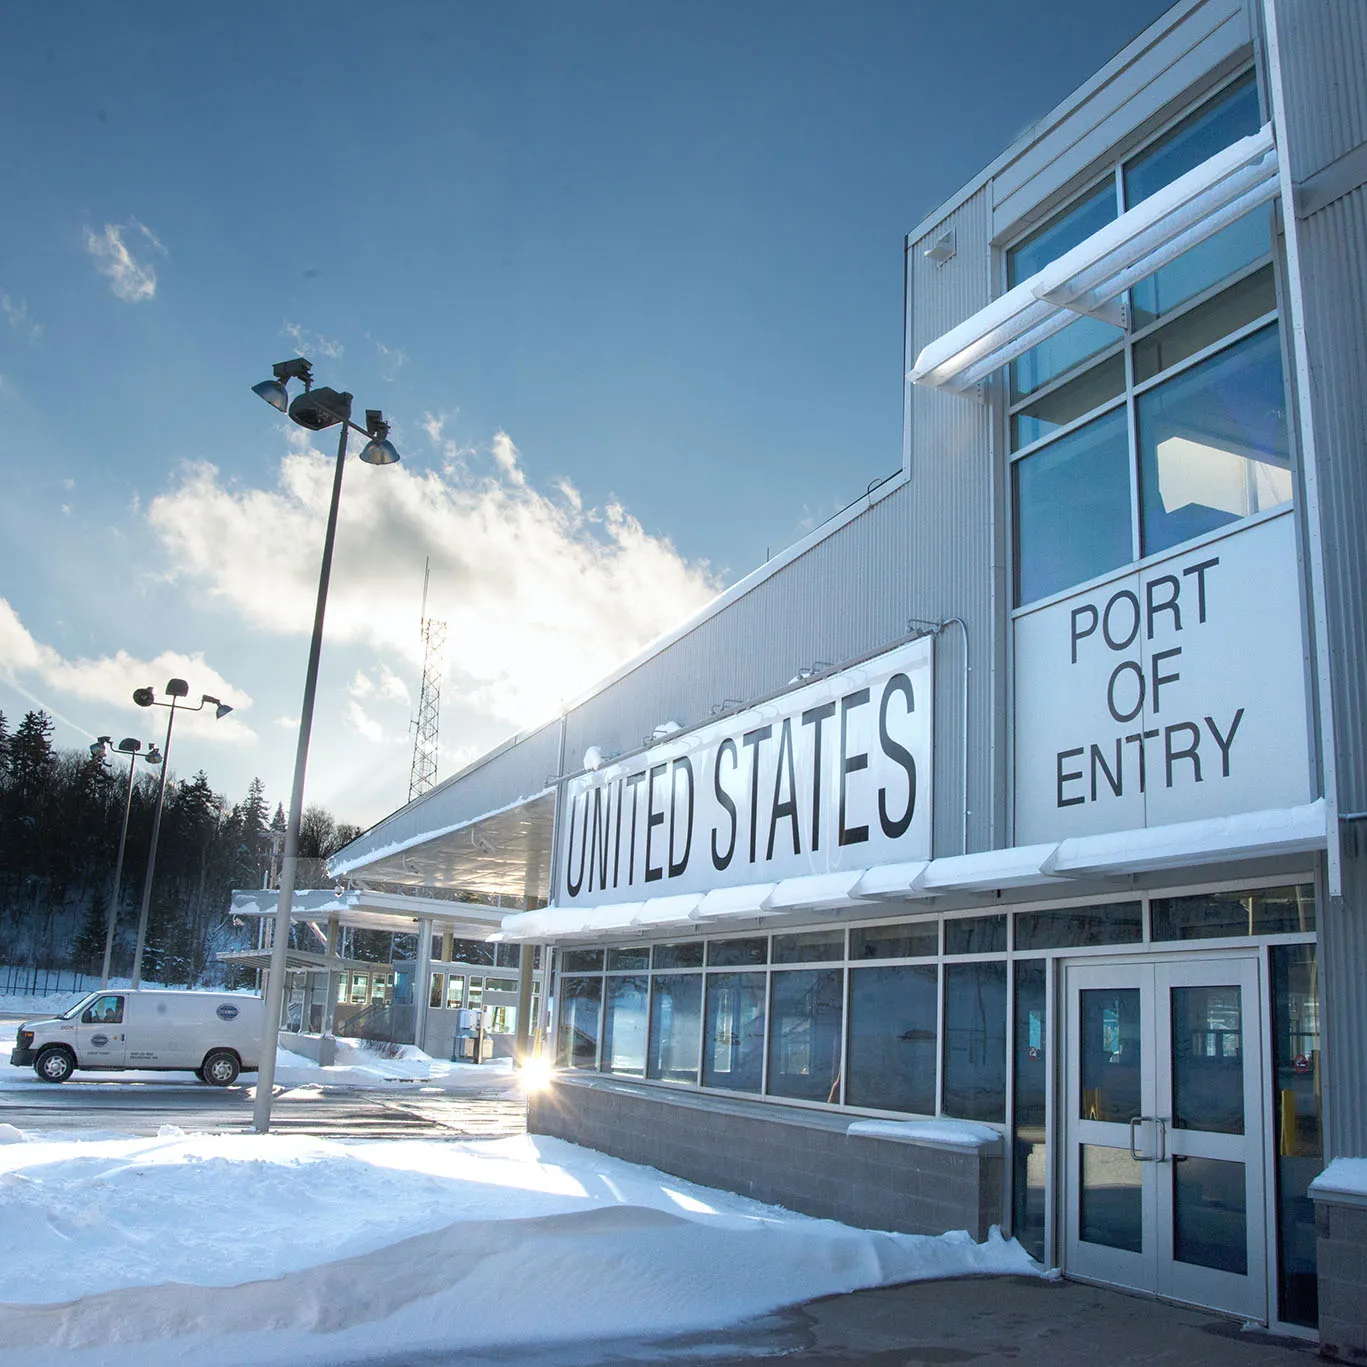 A United States port of entry on a sunny, snowy day